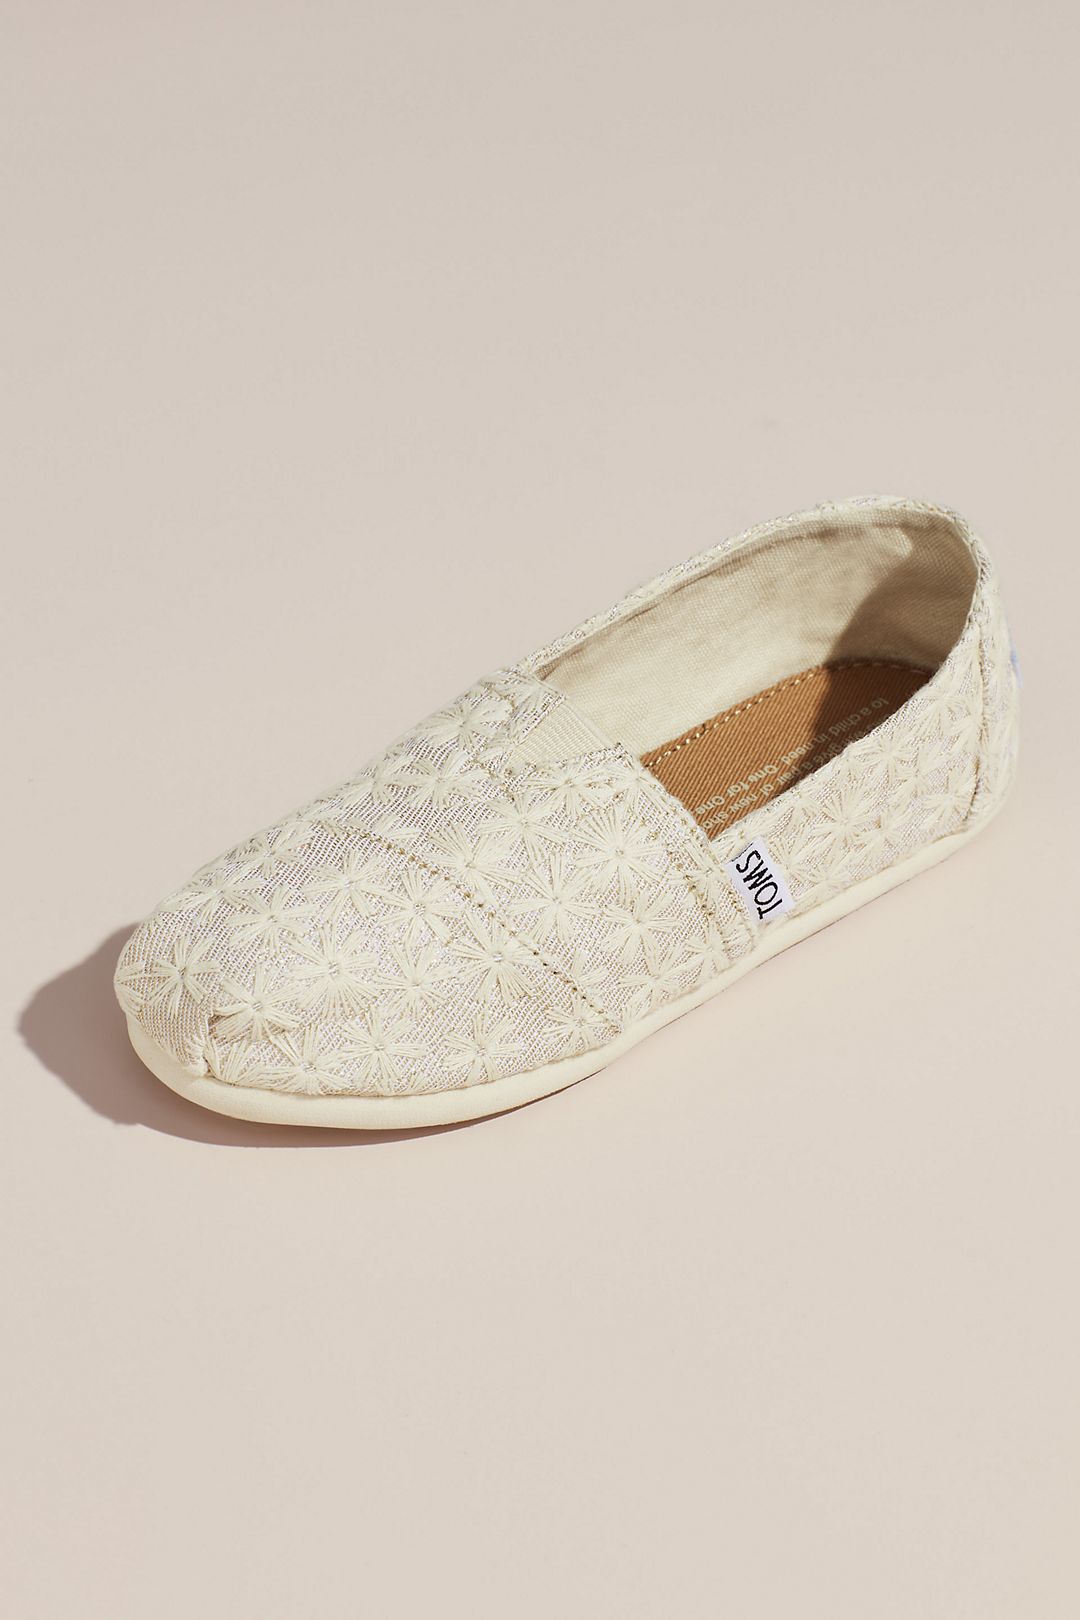 TOMS Embroidered Floral Slip-On Shoes Image 4